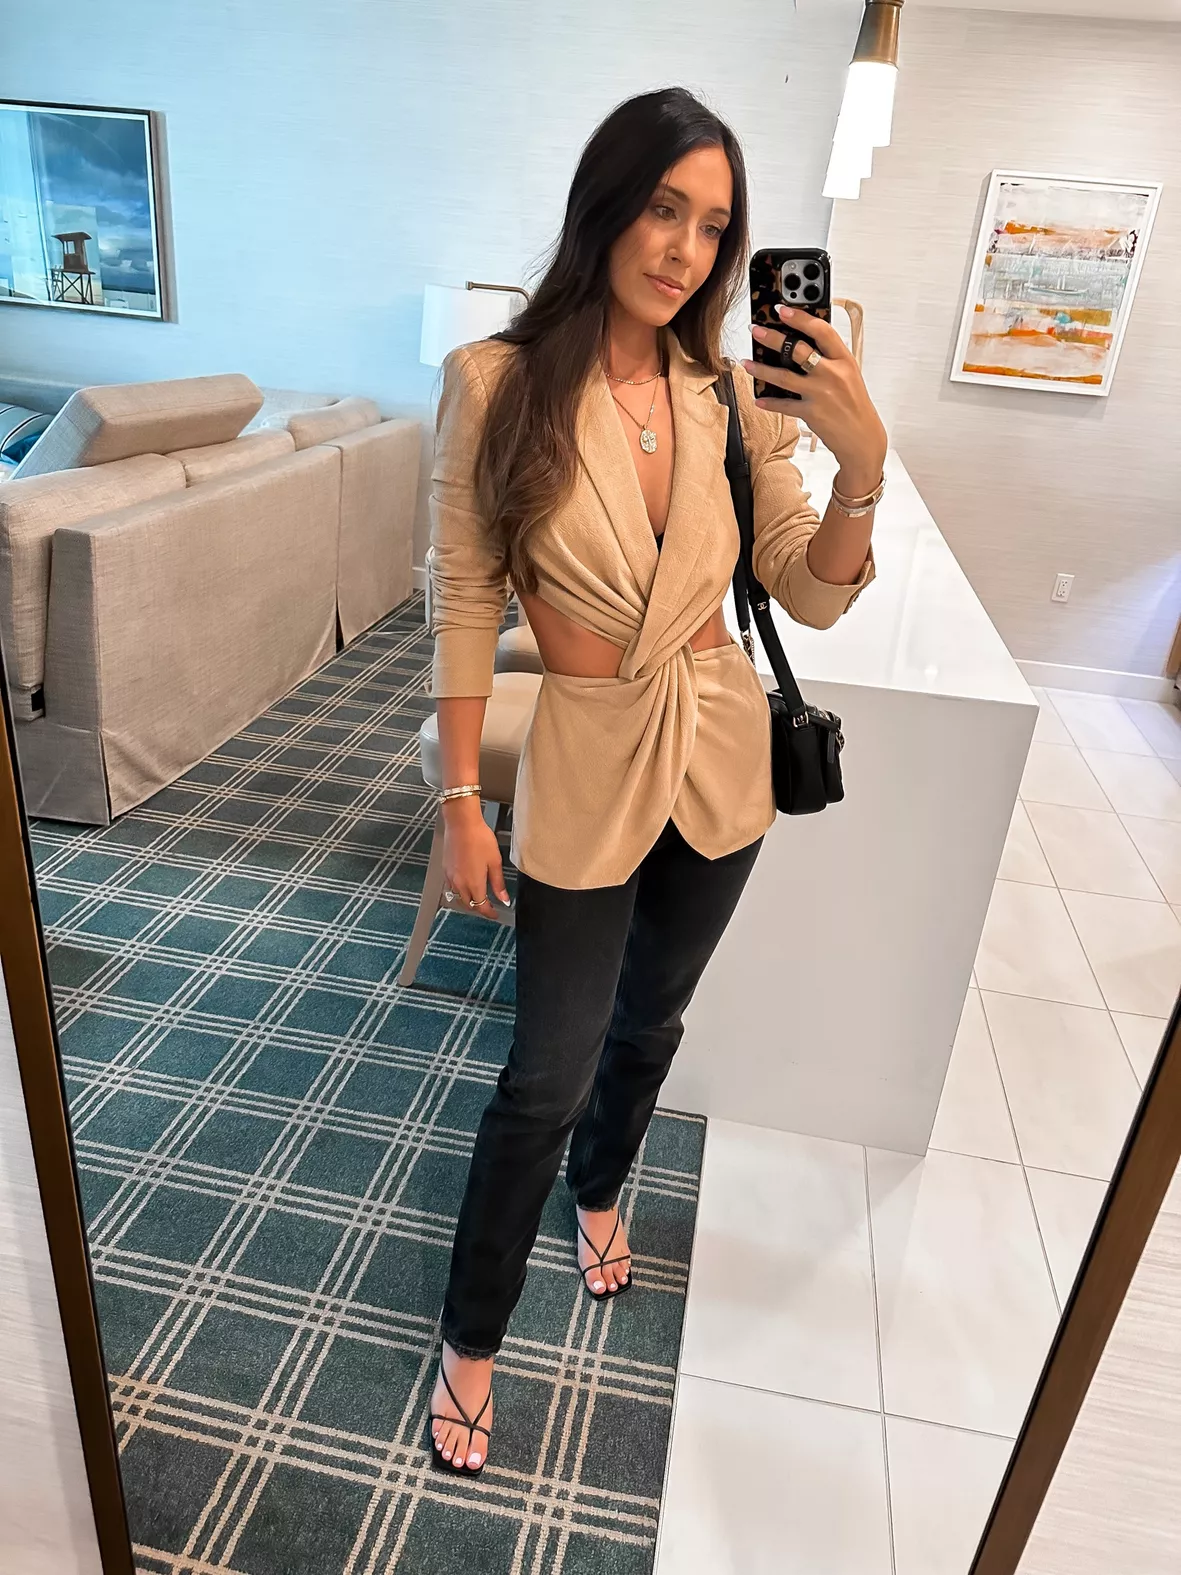 SHEA WHITNEY on Instagram: “Casual & neutral Saturday look🙌🏼 And